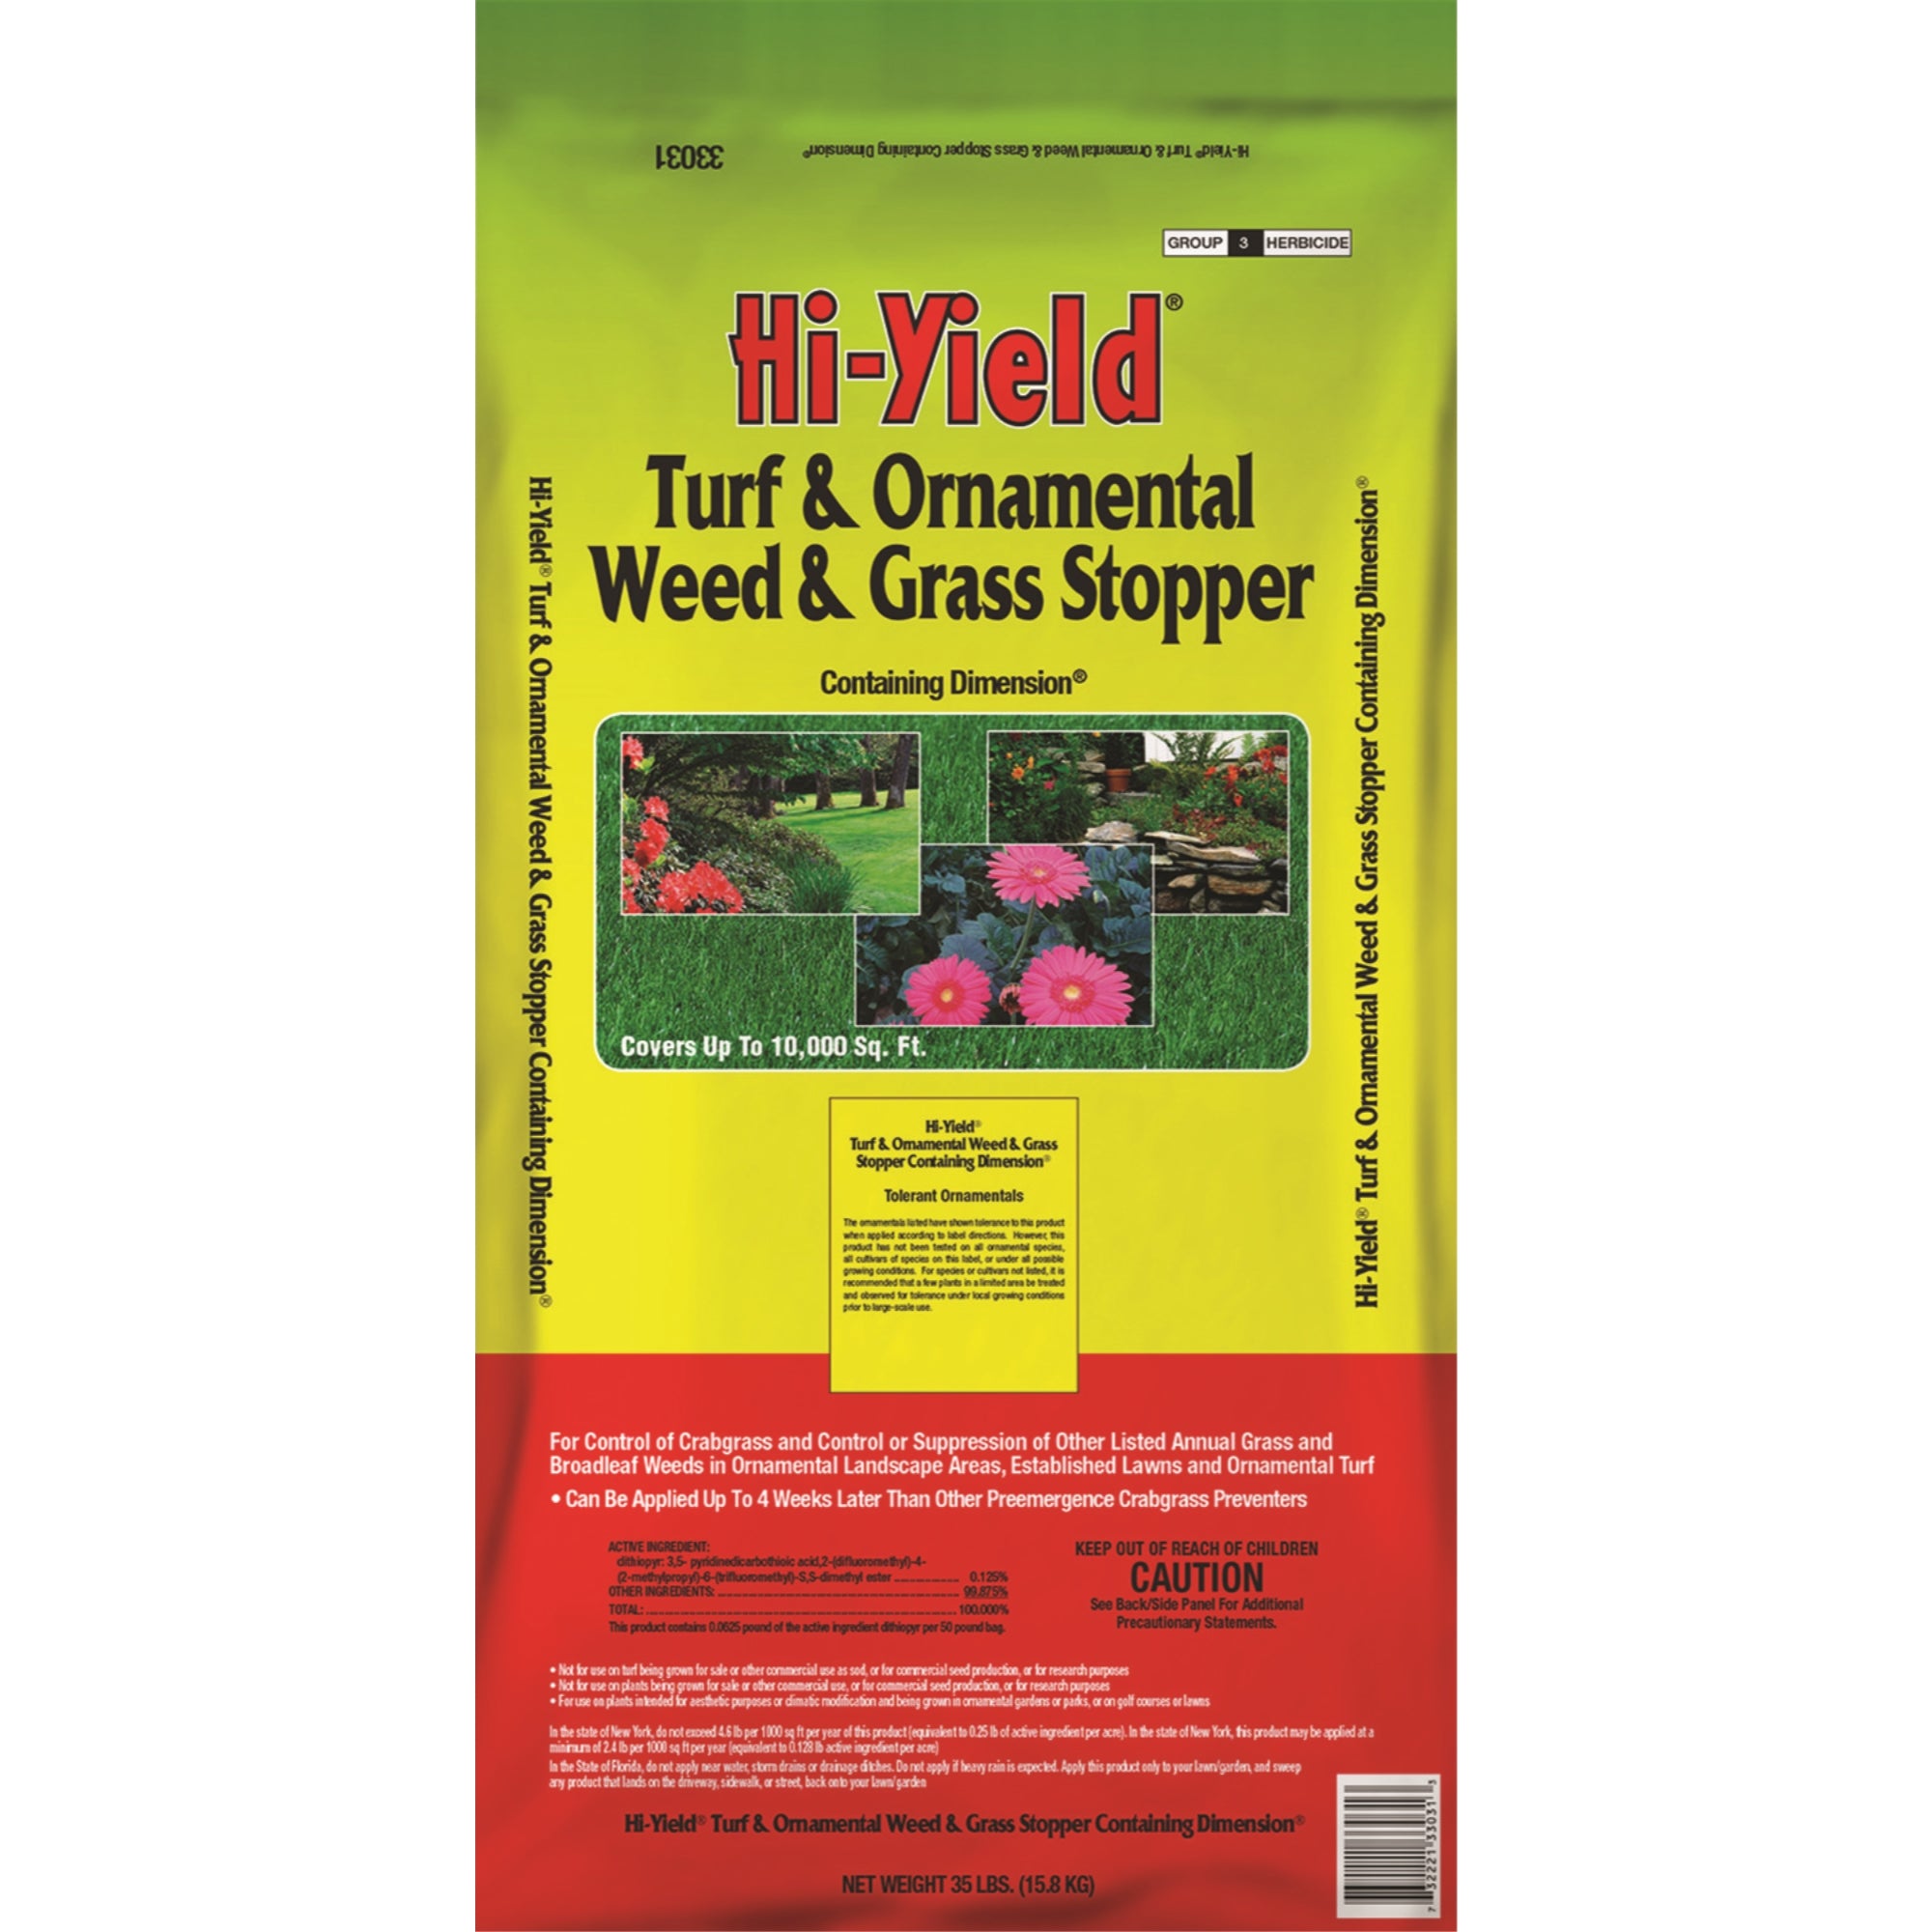 HI-Yield Turf and Ornamental Weed and Grass Stopper with Dimension